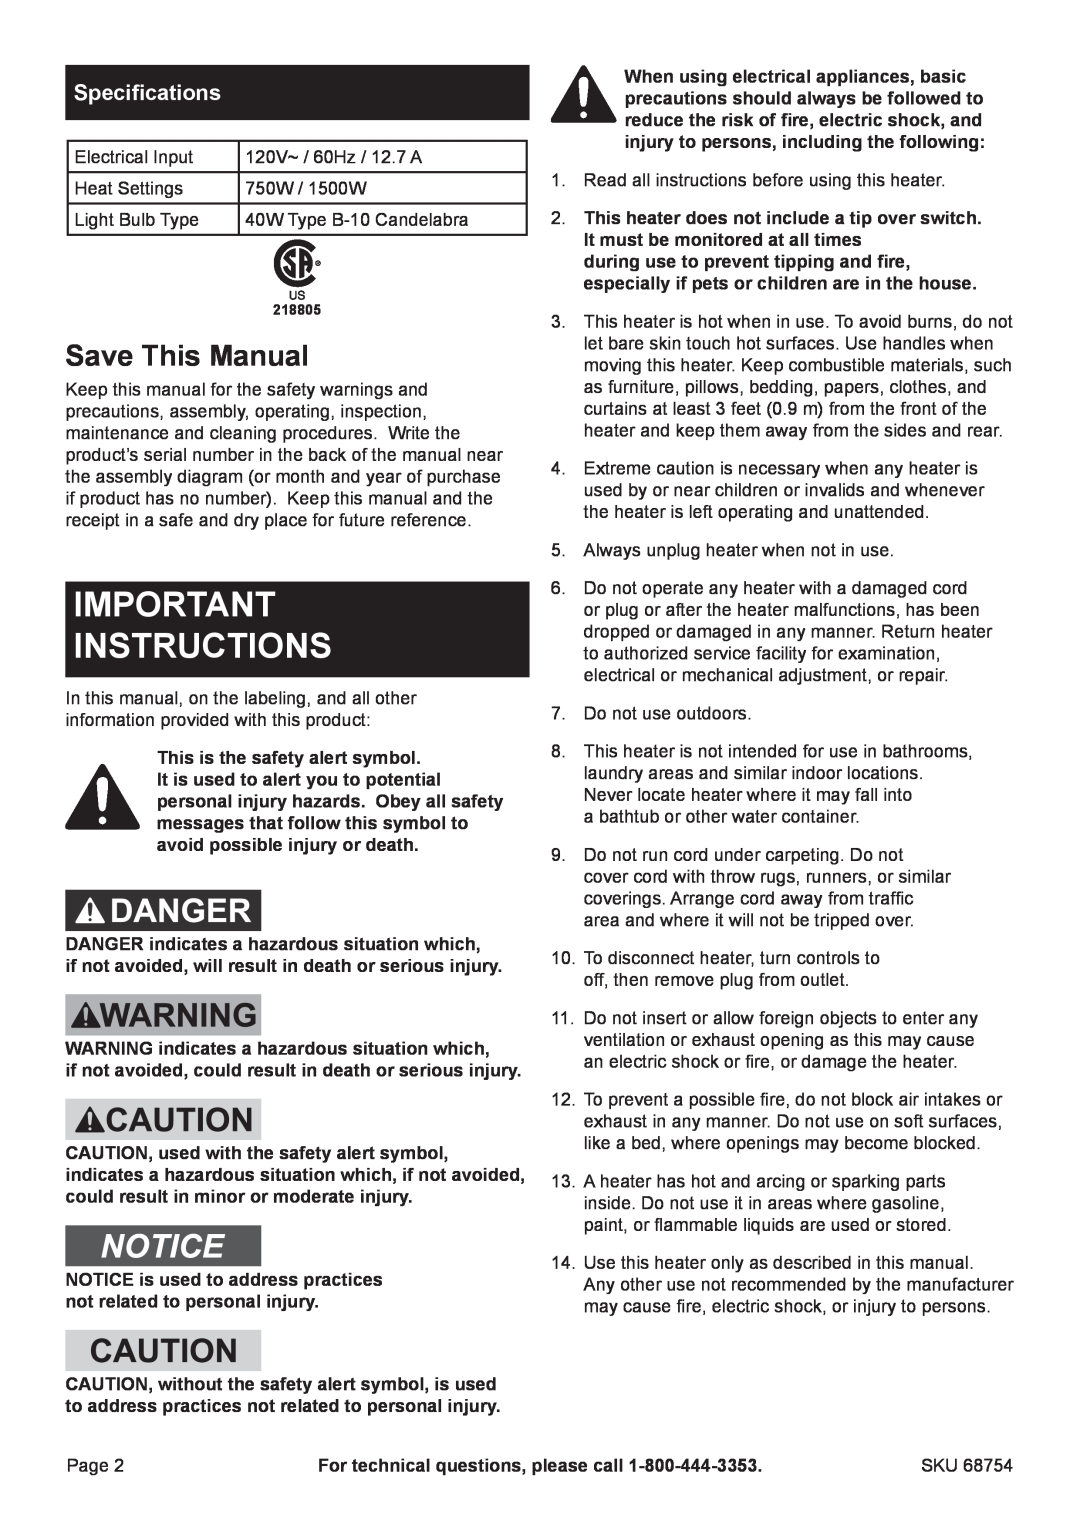 Harbor Freight Tools 68754 manual Save This Manual, Specifications, Instructions 